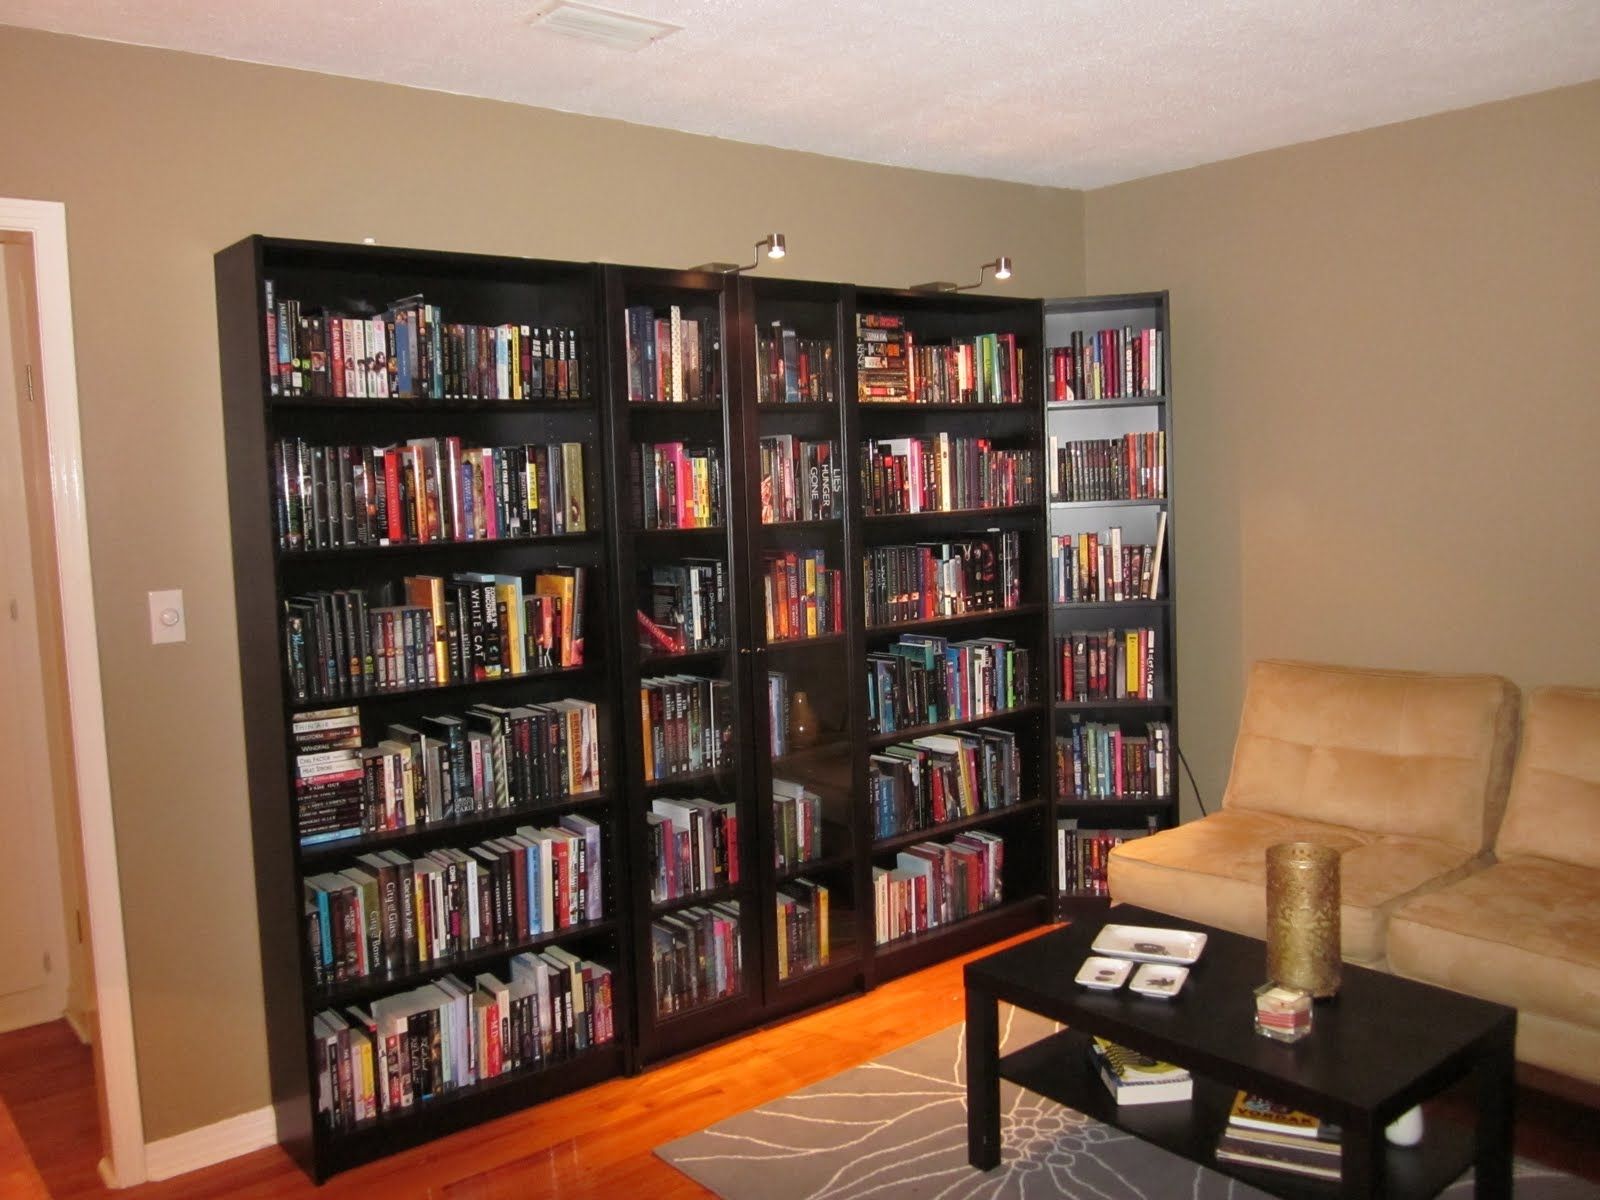 Emejing Bookcase Design Ideas Contemporary Amazing Design Ideas Within Traditional Bookshelf Designs (View 11 of 15)